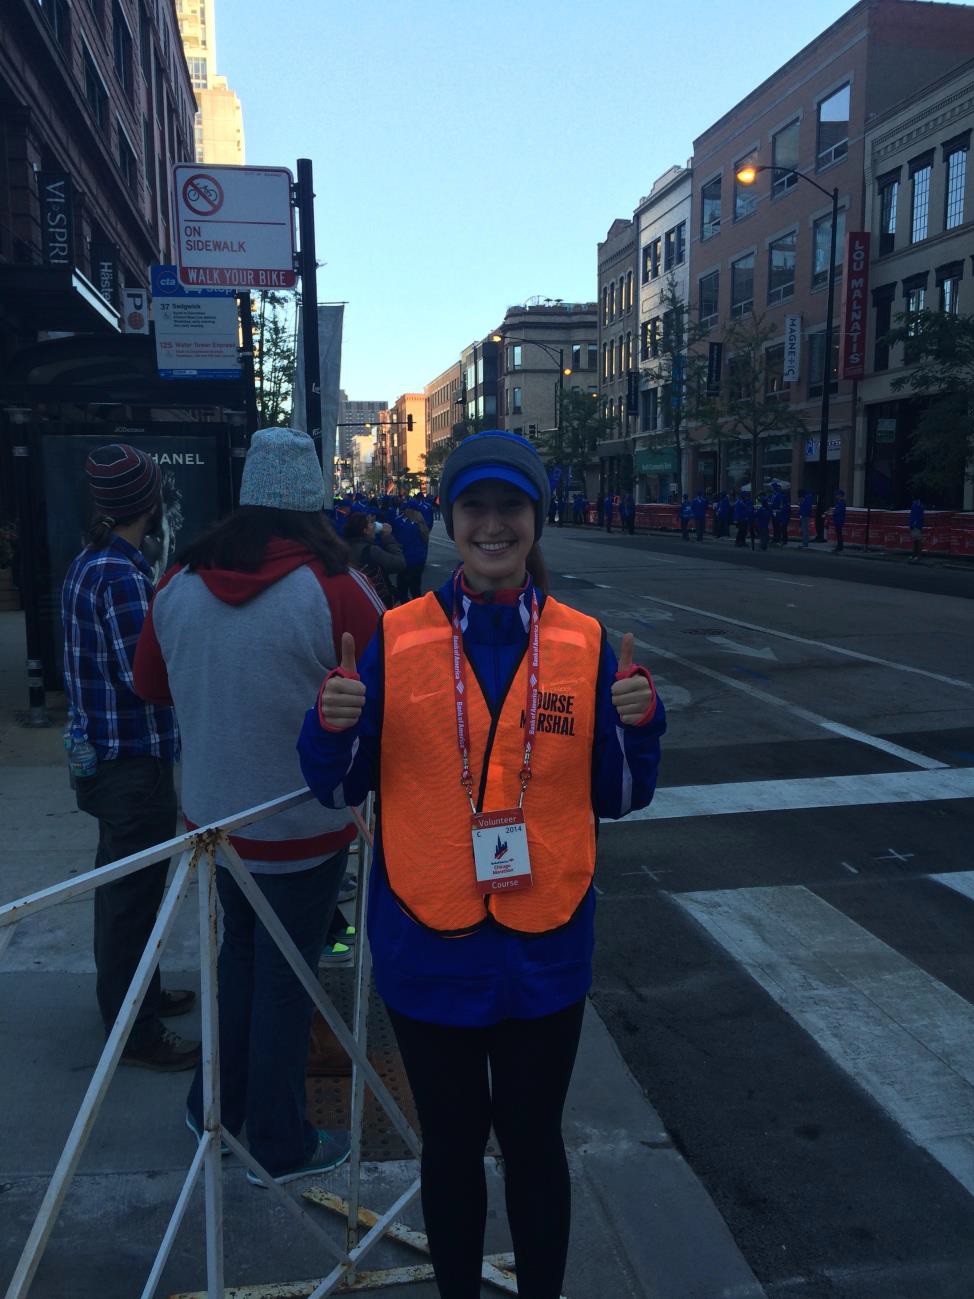 Volunteer or check out the Chicago Marathon! Plus, as was my goal when I moved here, I'll be running it this year and welcoming all the high fives along the course.